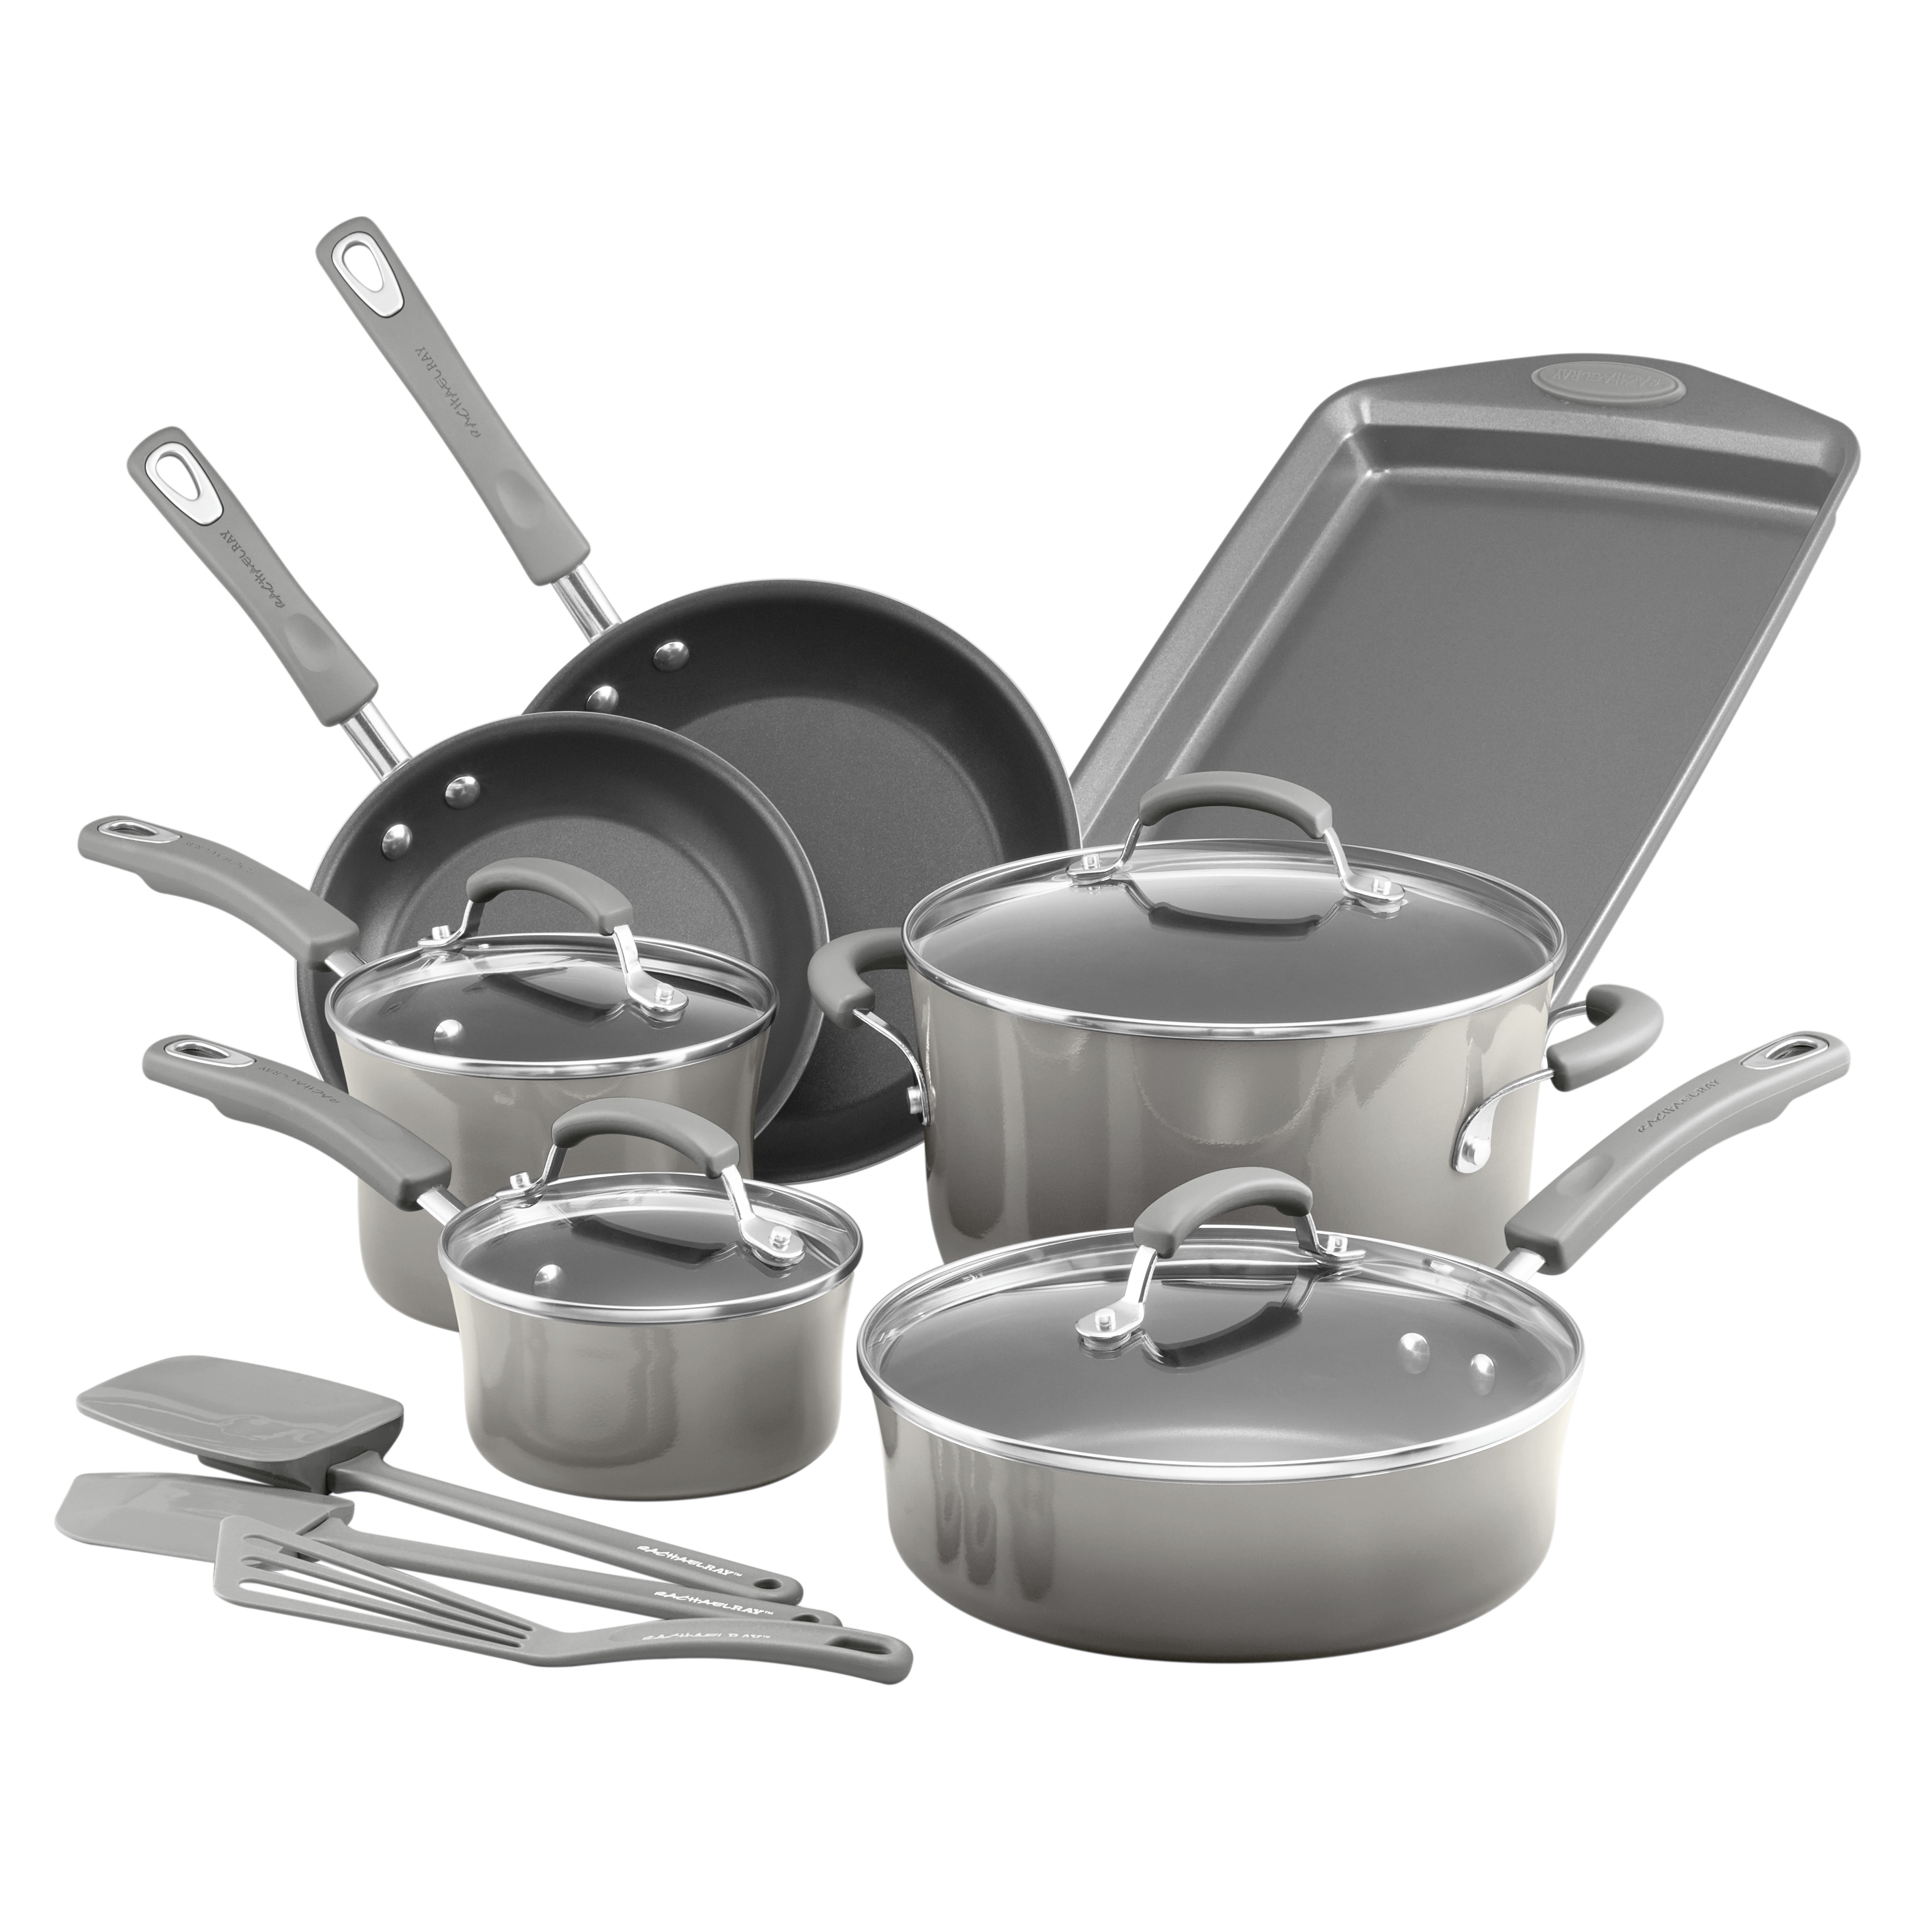 Rachael Ray Classic Brights Porcelain Nonstick 14-Piece Cookware Set with Bakeware and Tools, Sea Salt Gray